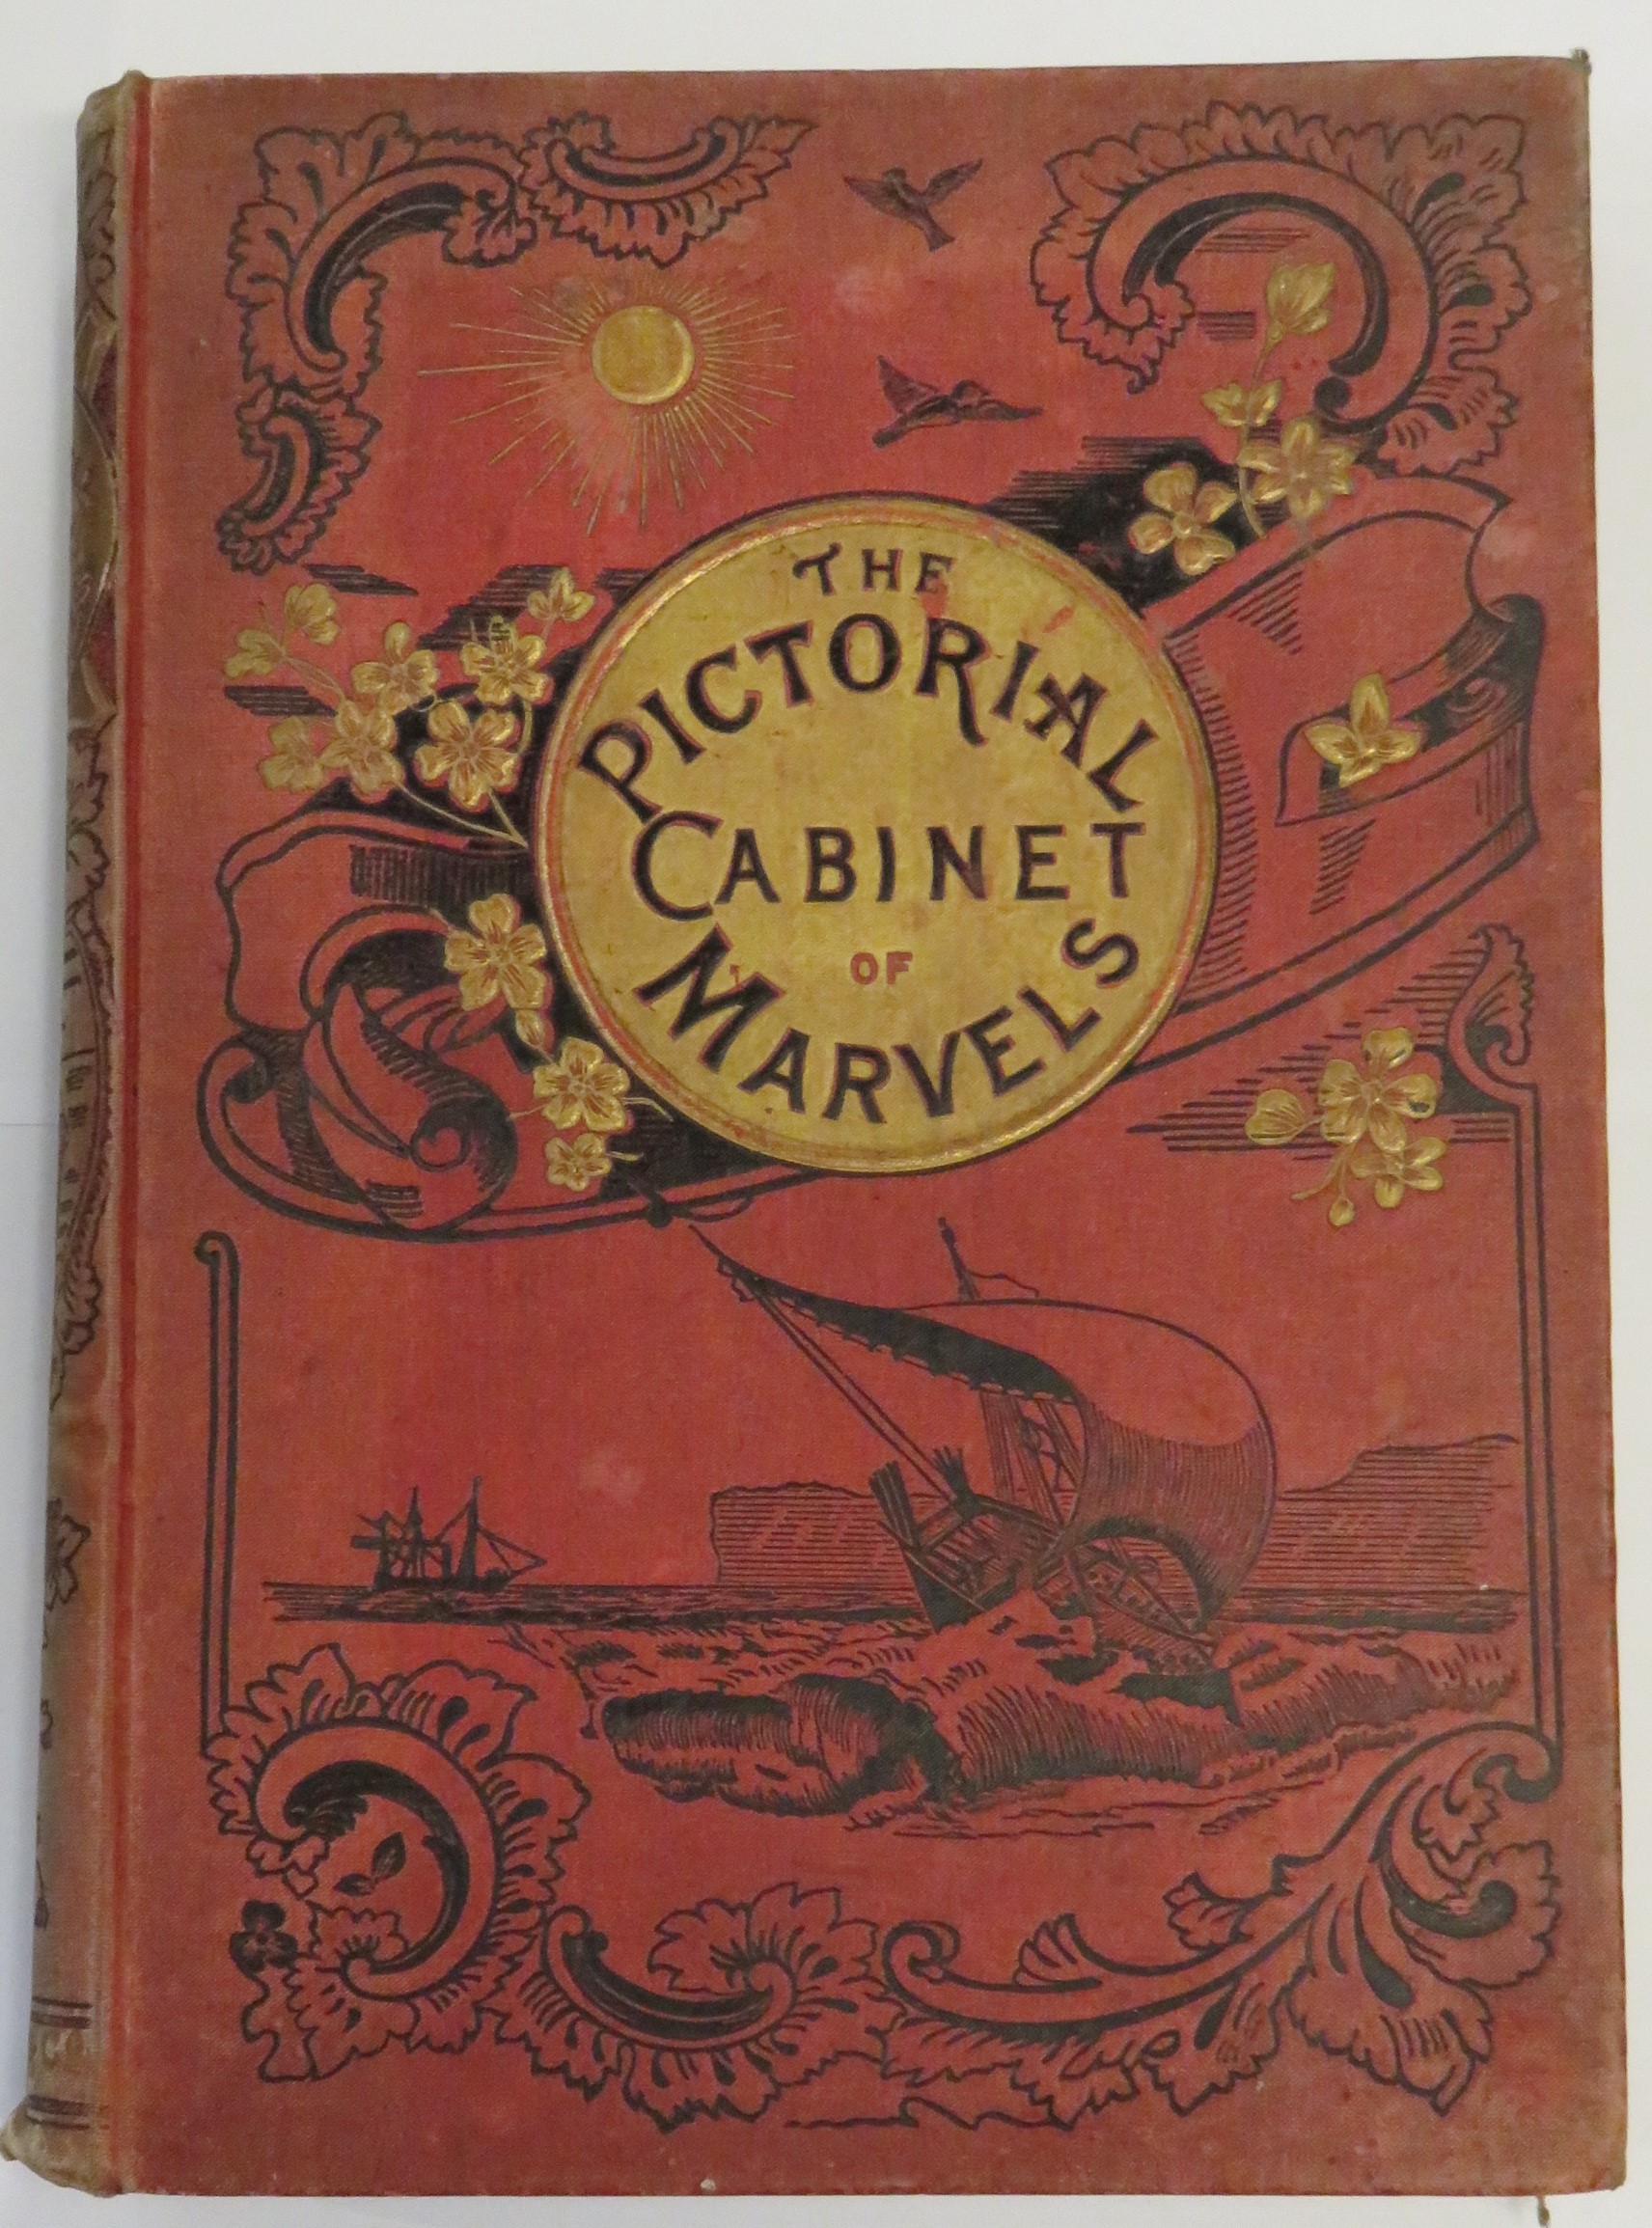 The Pictorial Cabinet of Marvels